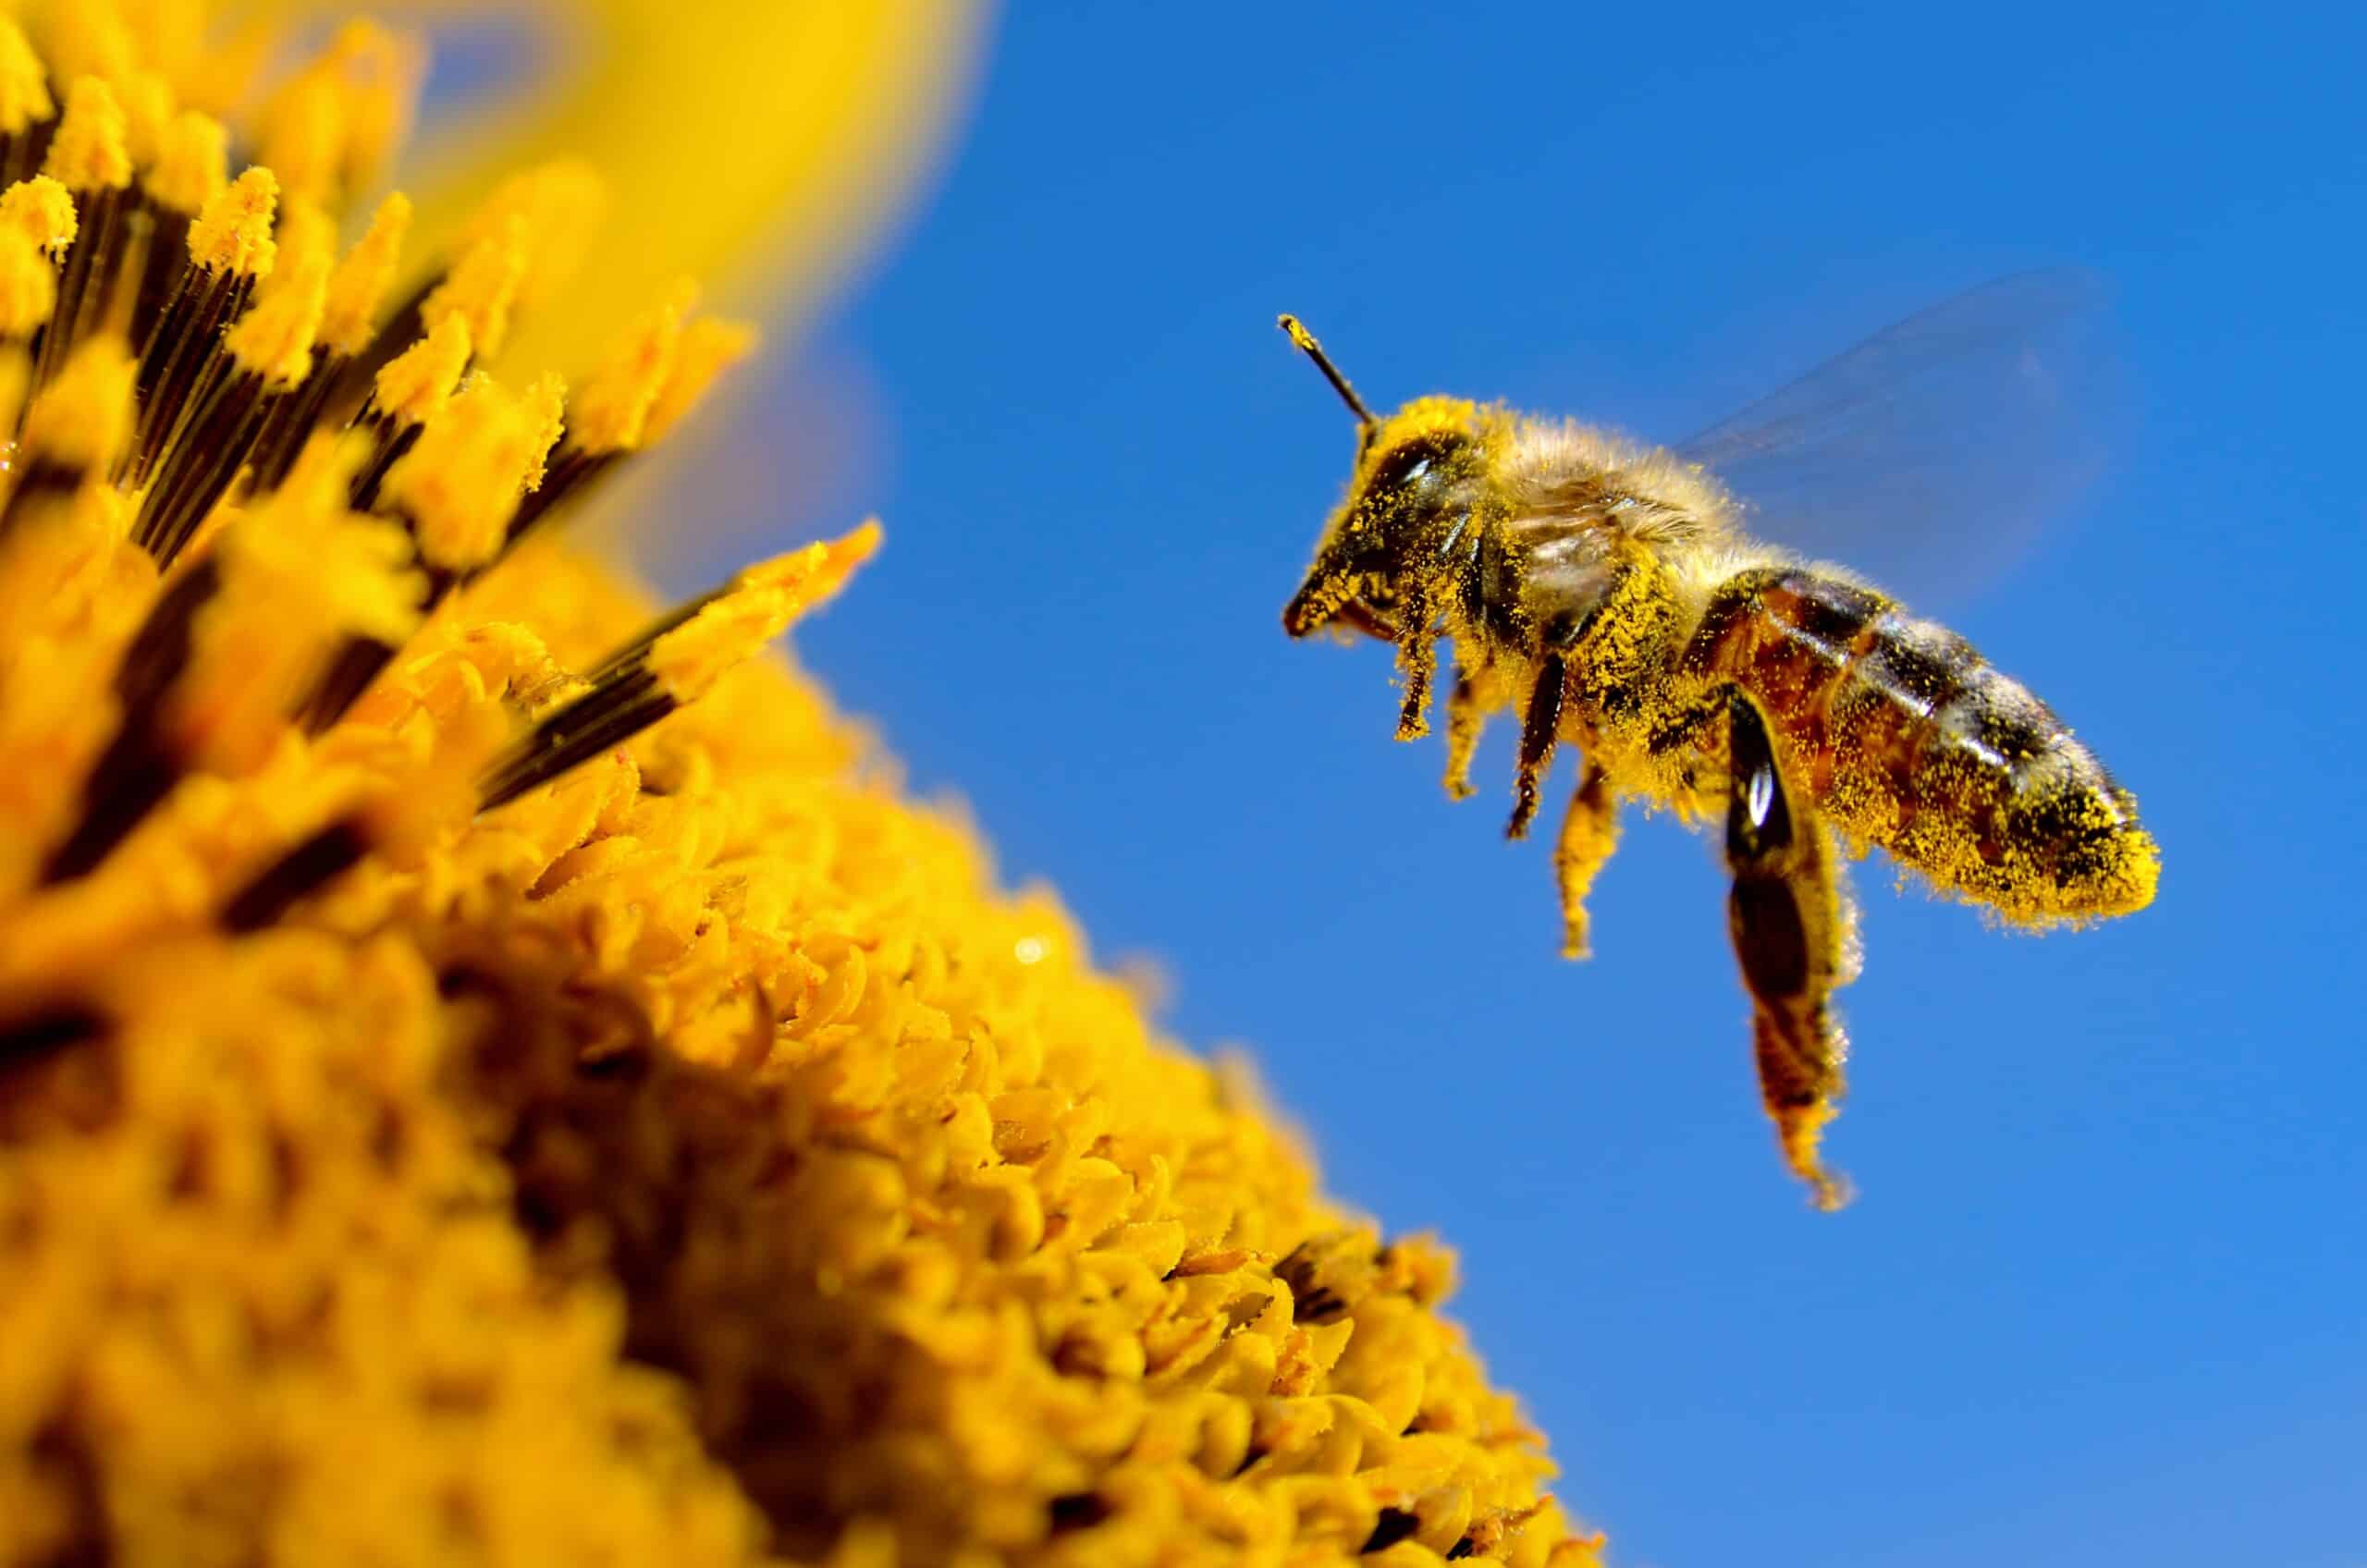 The Ultimate Guide To Identifying Bees In Your Garden